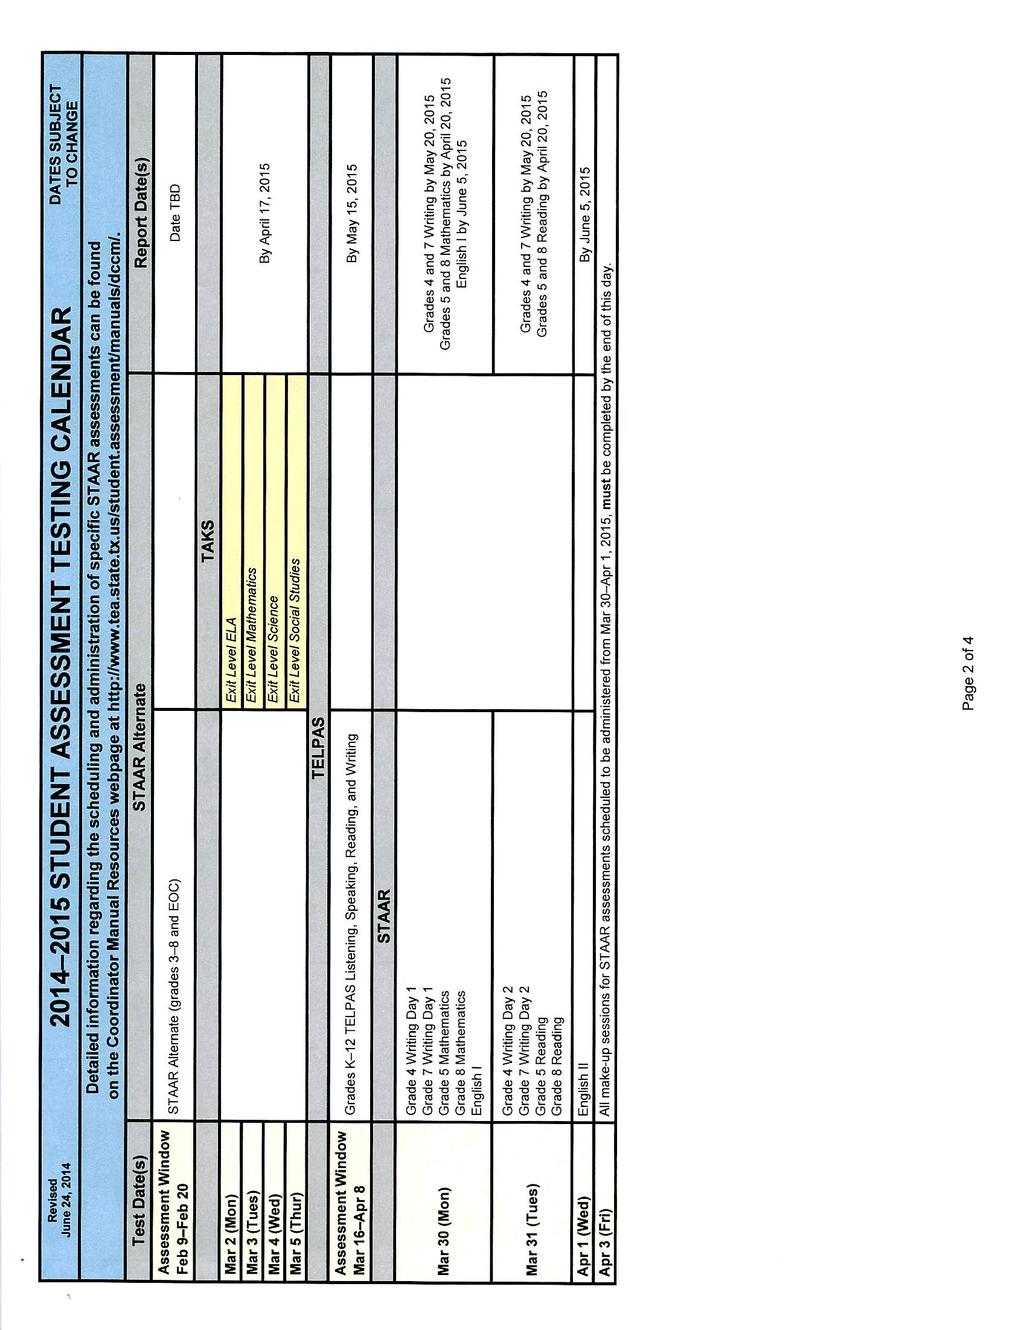 2014-2015 STUDENT ASSESSMENT TESTING CALENDAR Detailed information regarding the sciieduiing and administration of specific assessments can be found on the Coordinator Manual Resources webpage at